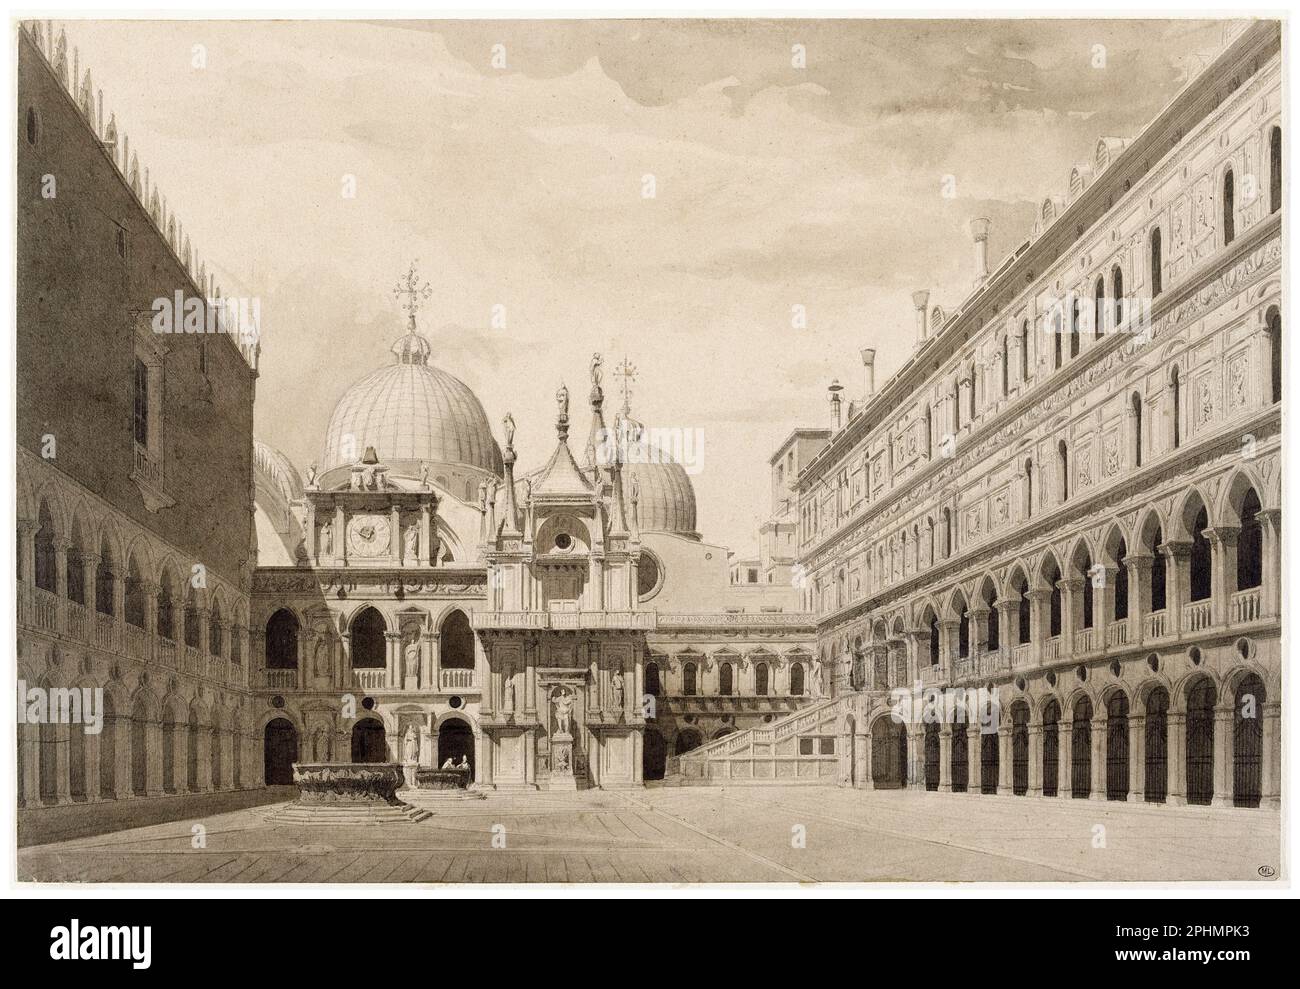 Charles Garnier, The courtyard of the Doge's palace in Venice, architectural drawing, 1852 Stock Photo